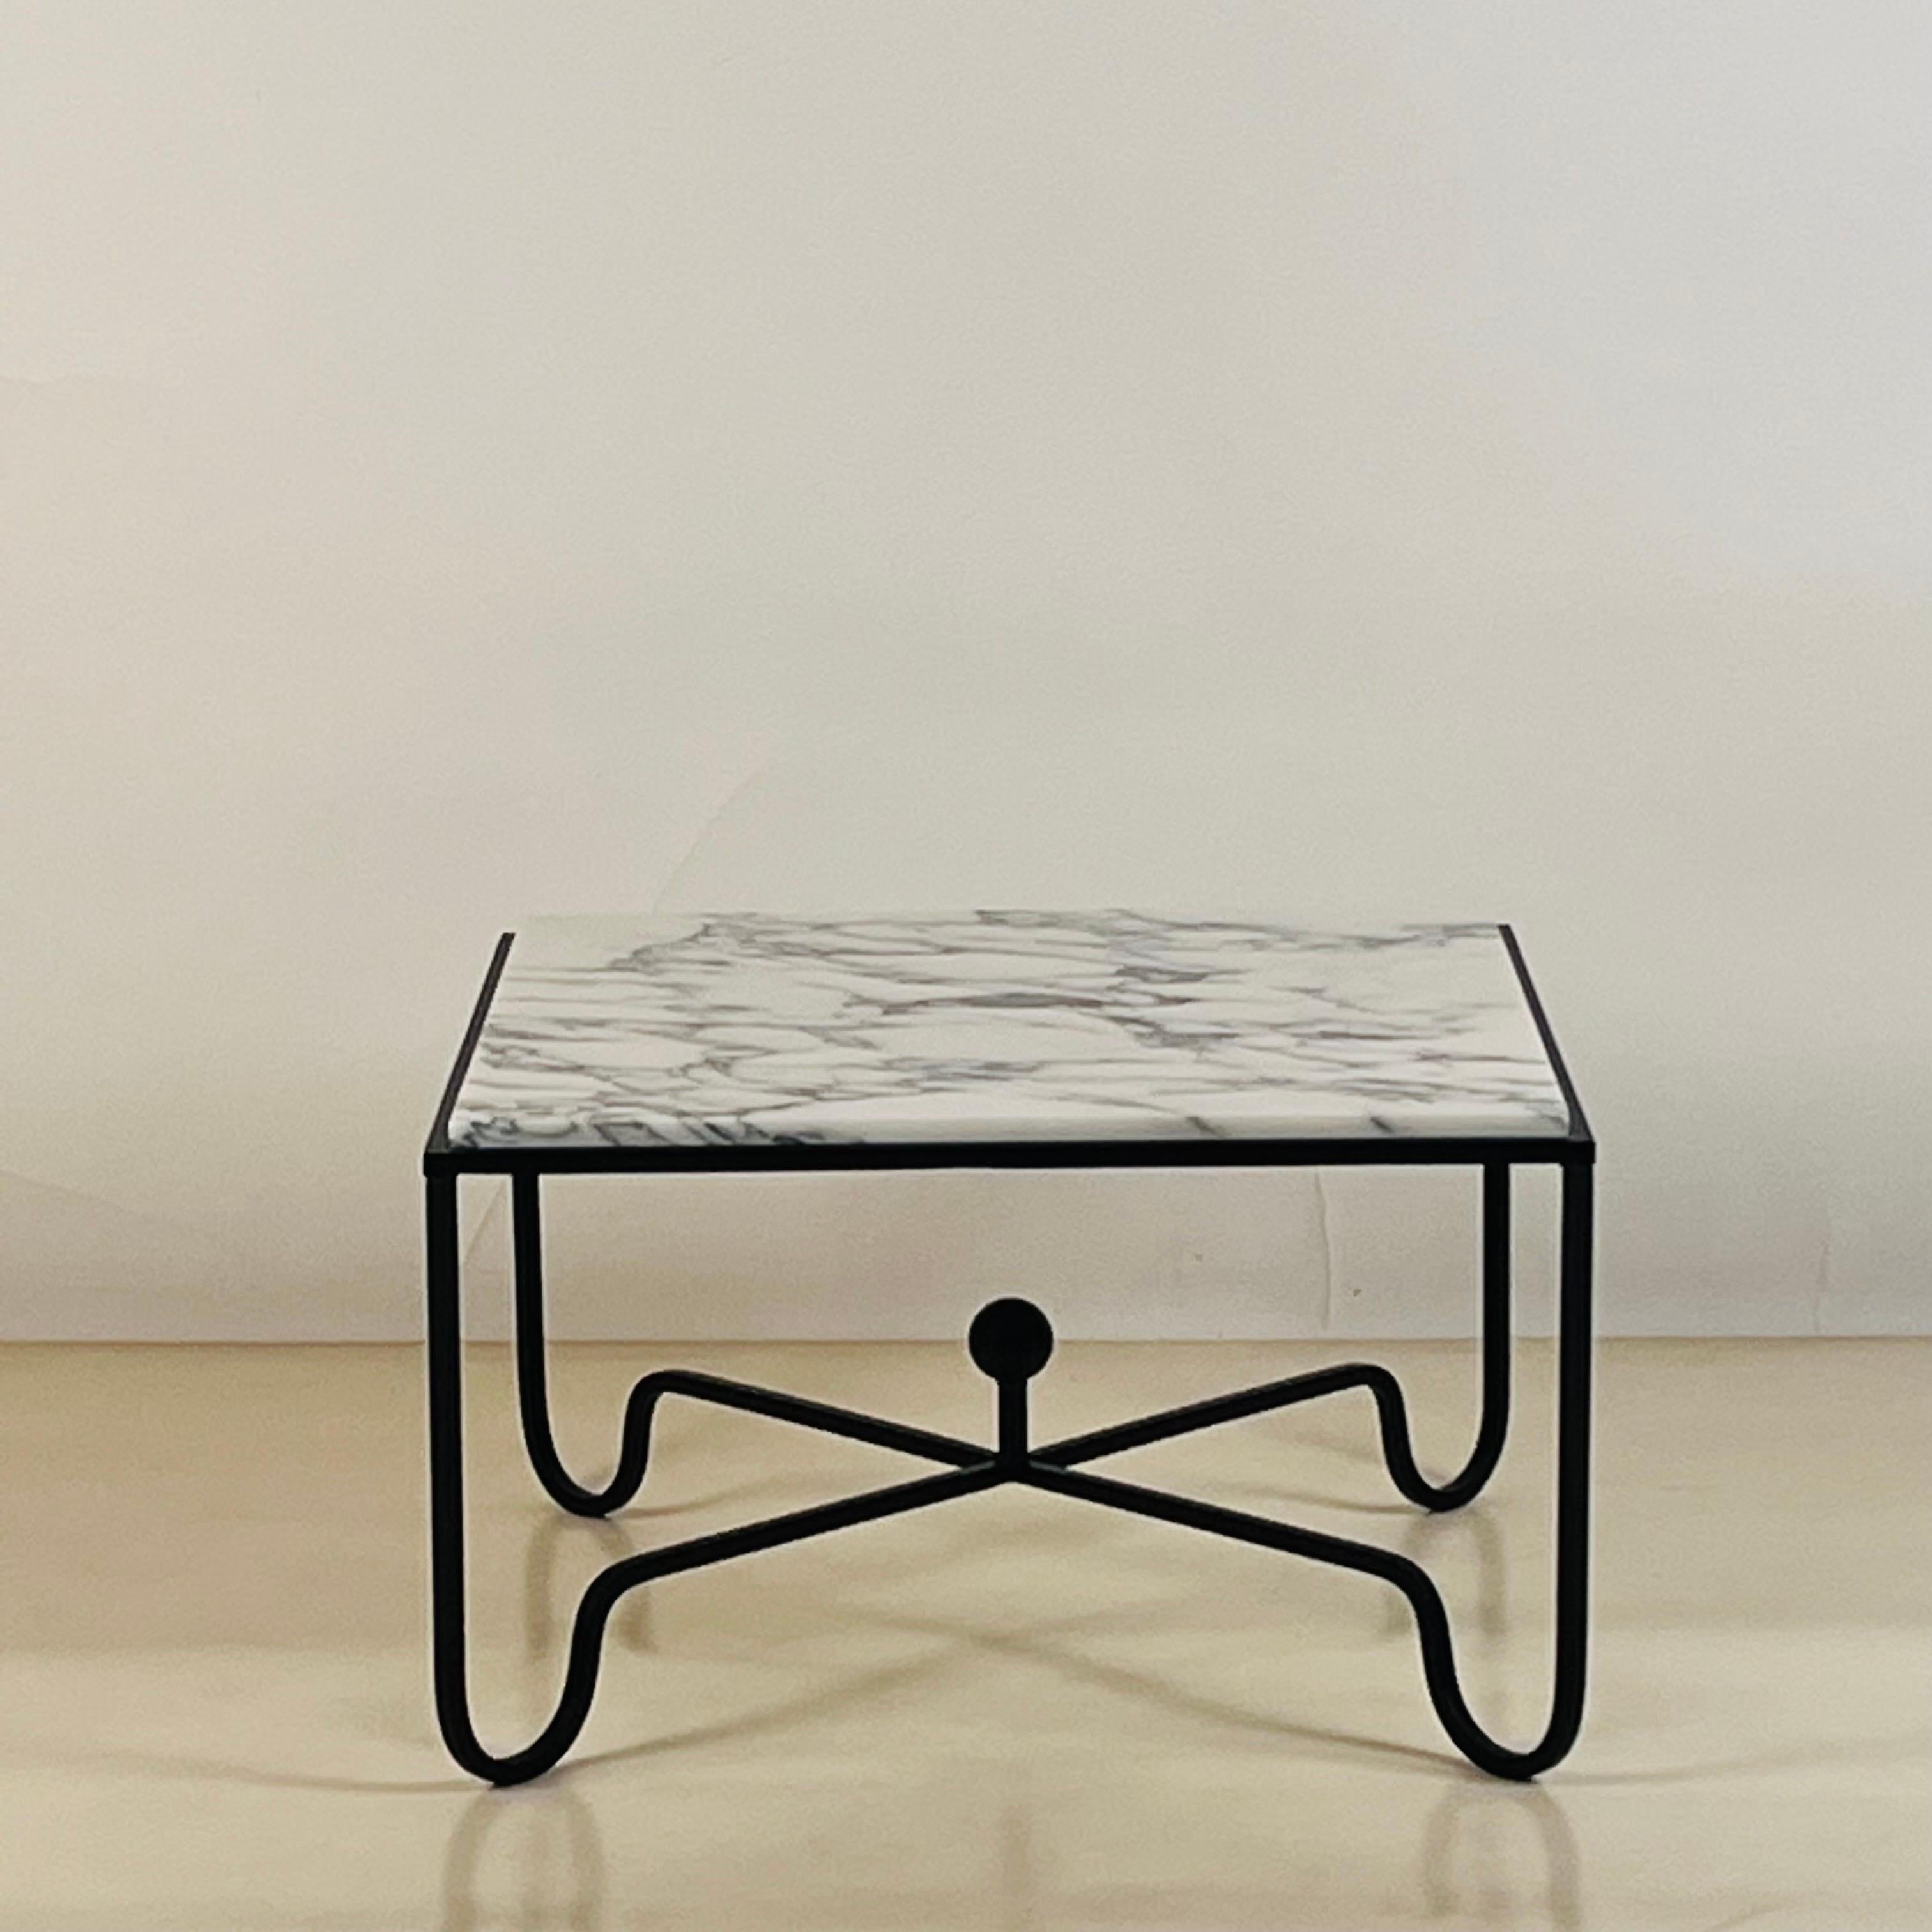 Polished Chic 3-Part Arabescato Marble 'Entretoise' Coffee Table by Design Frères For Sale